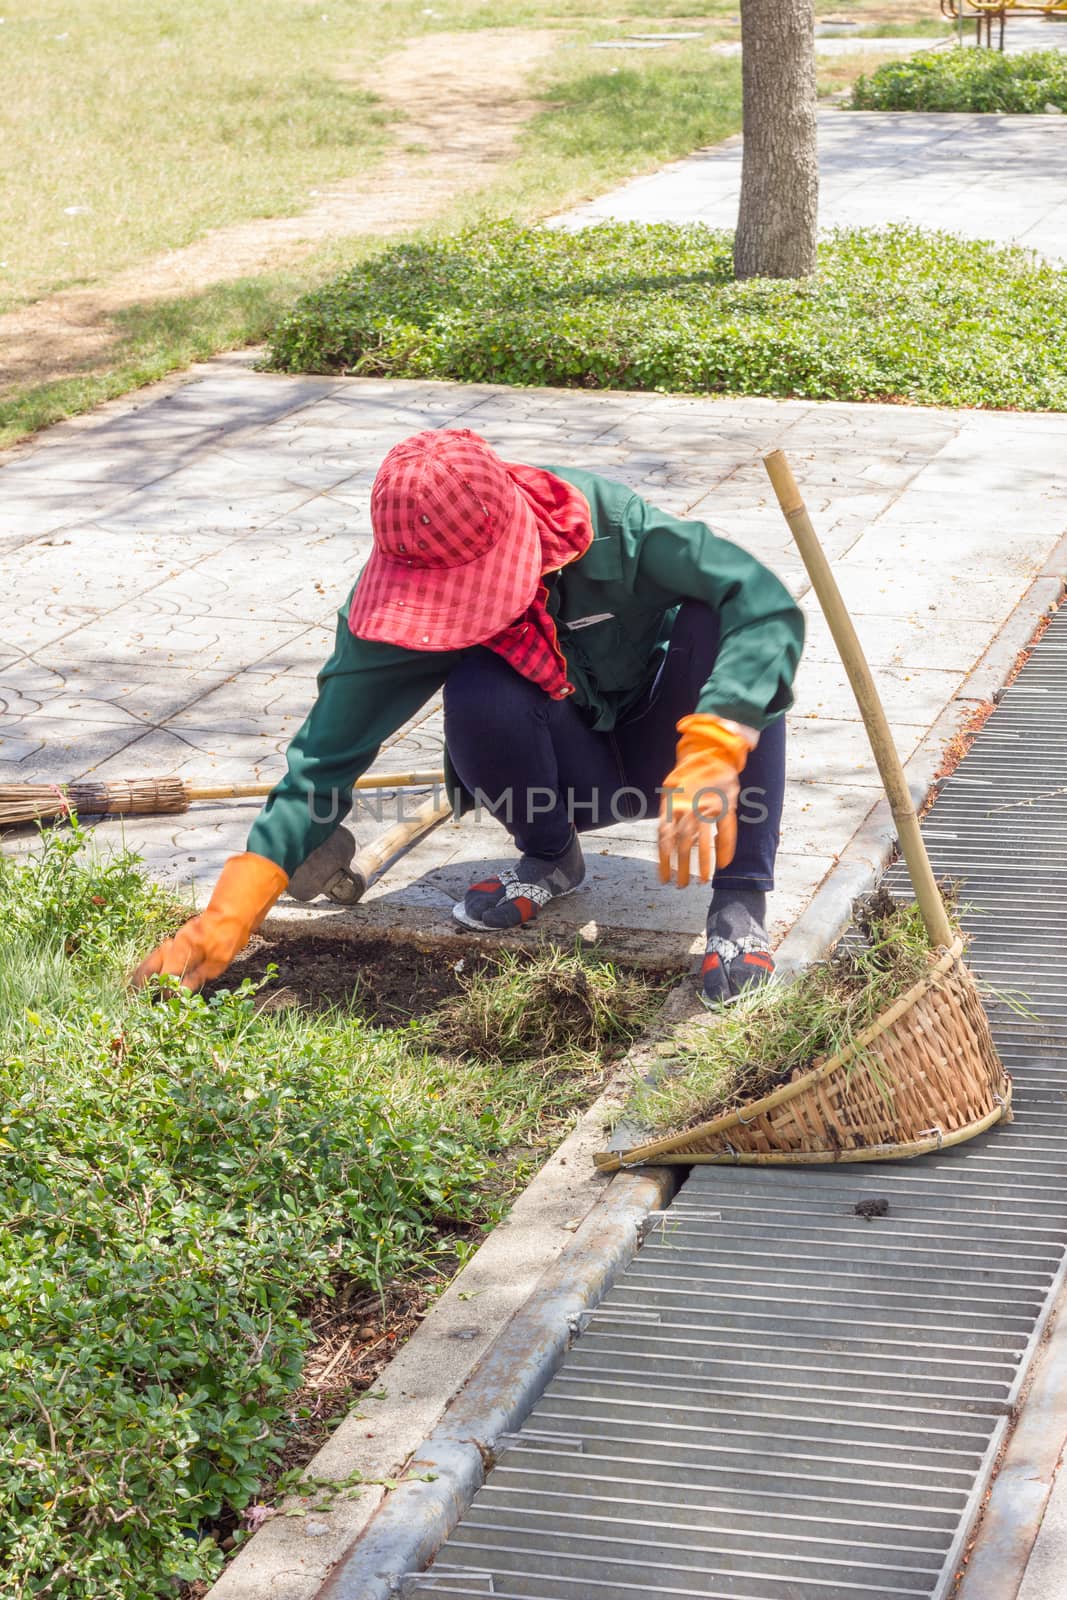 gardener pulling out weeds in public park in Thailand, motion blur